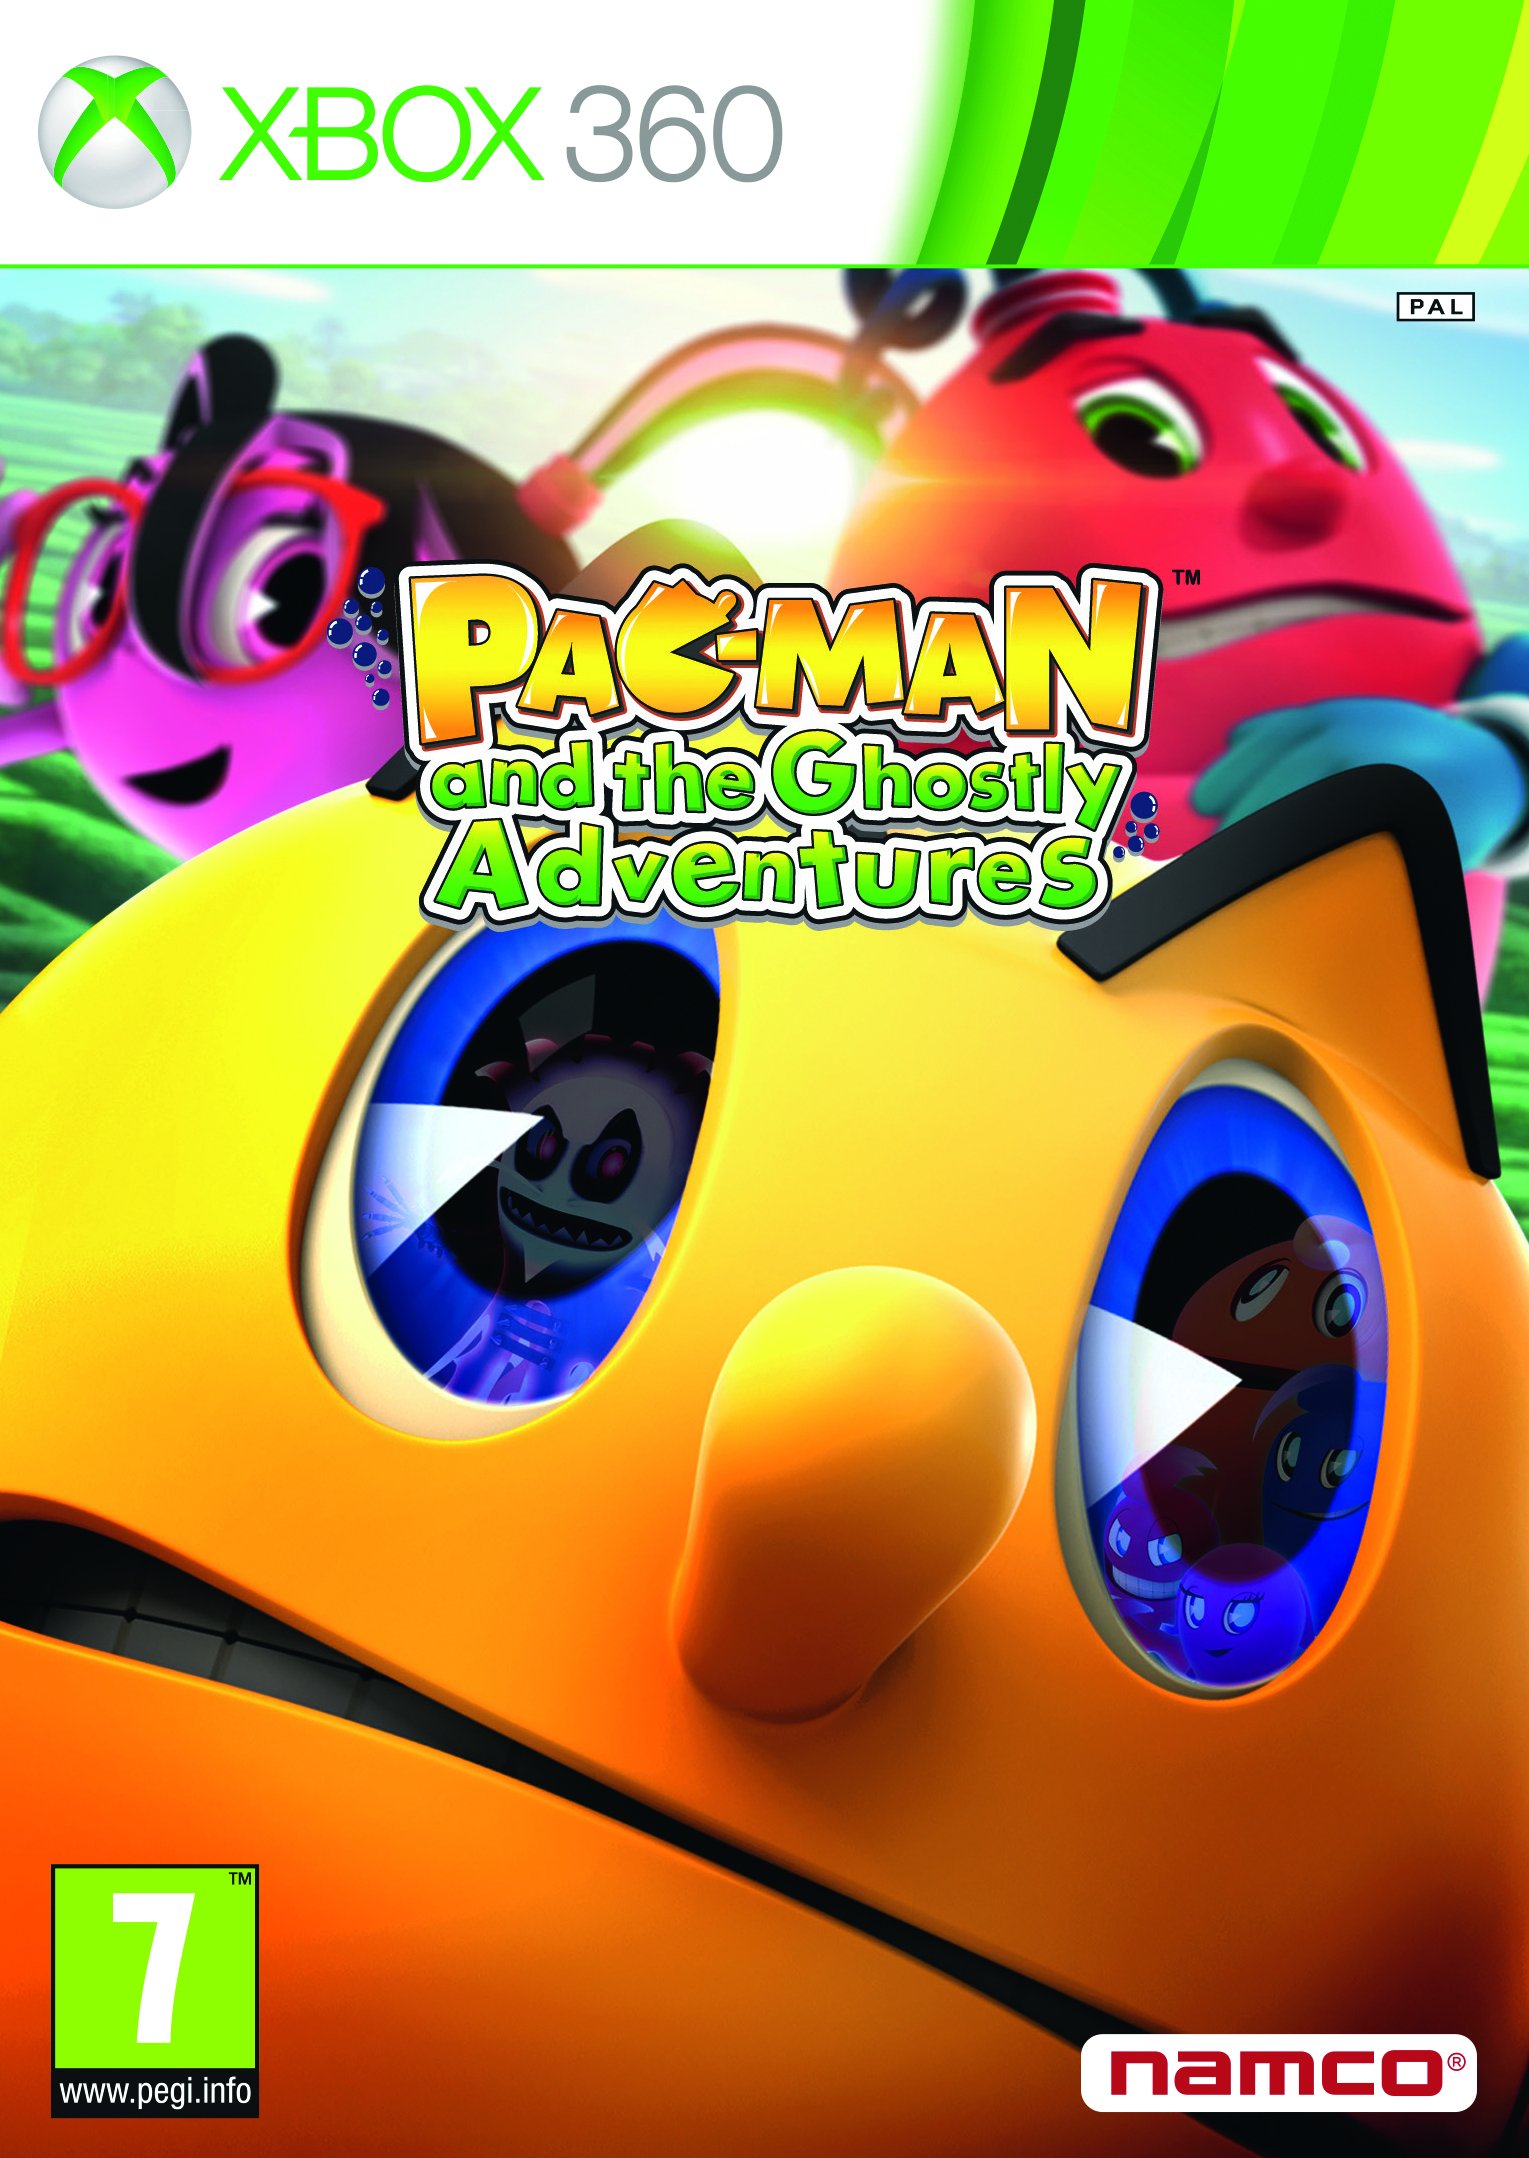 Image of Pac-Man and the Ghostly Adventures